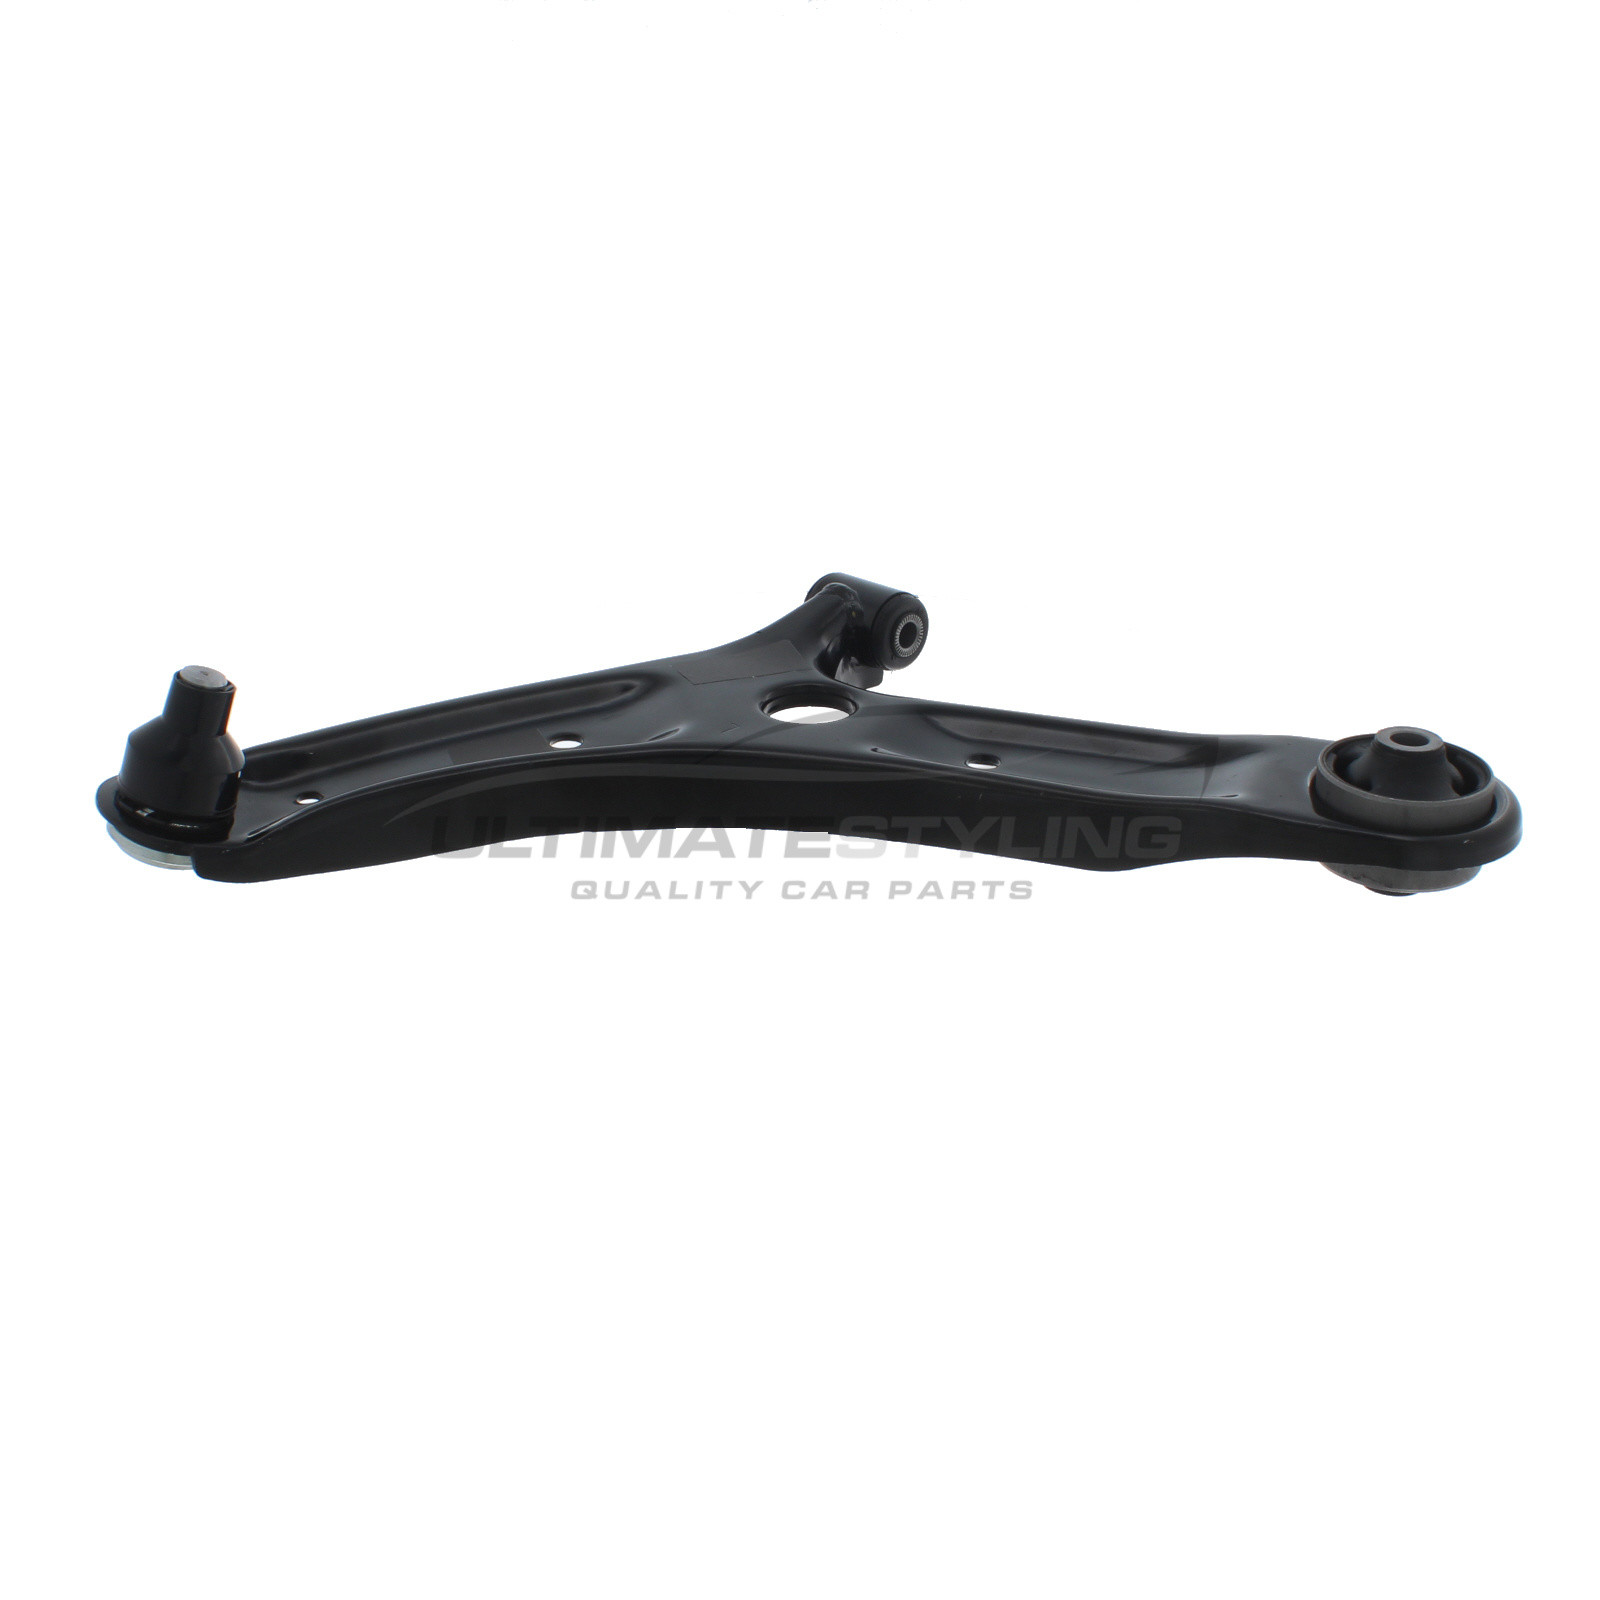 Hyundai i10 2013-2019 Front Lower Suspension Arm (Steel) Including Ball Joint and Rear Bush Passenger Side (LH)